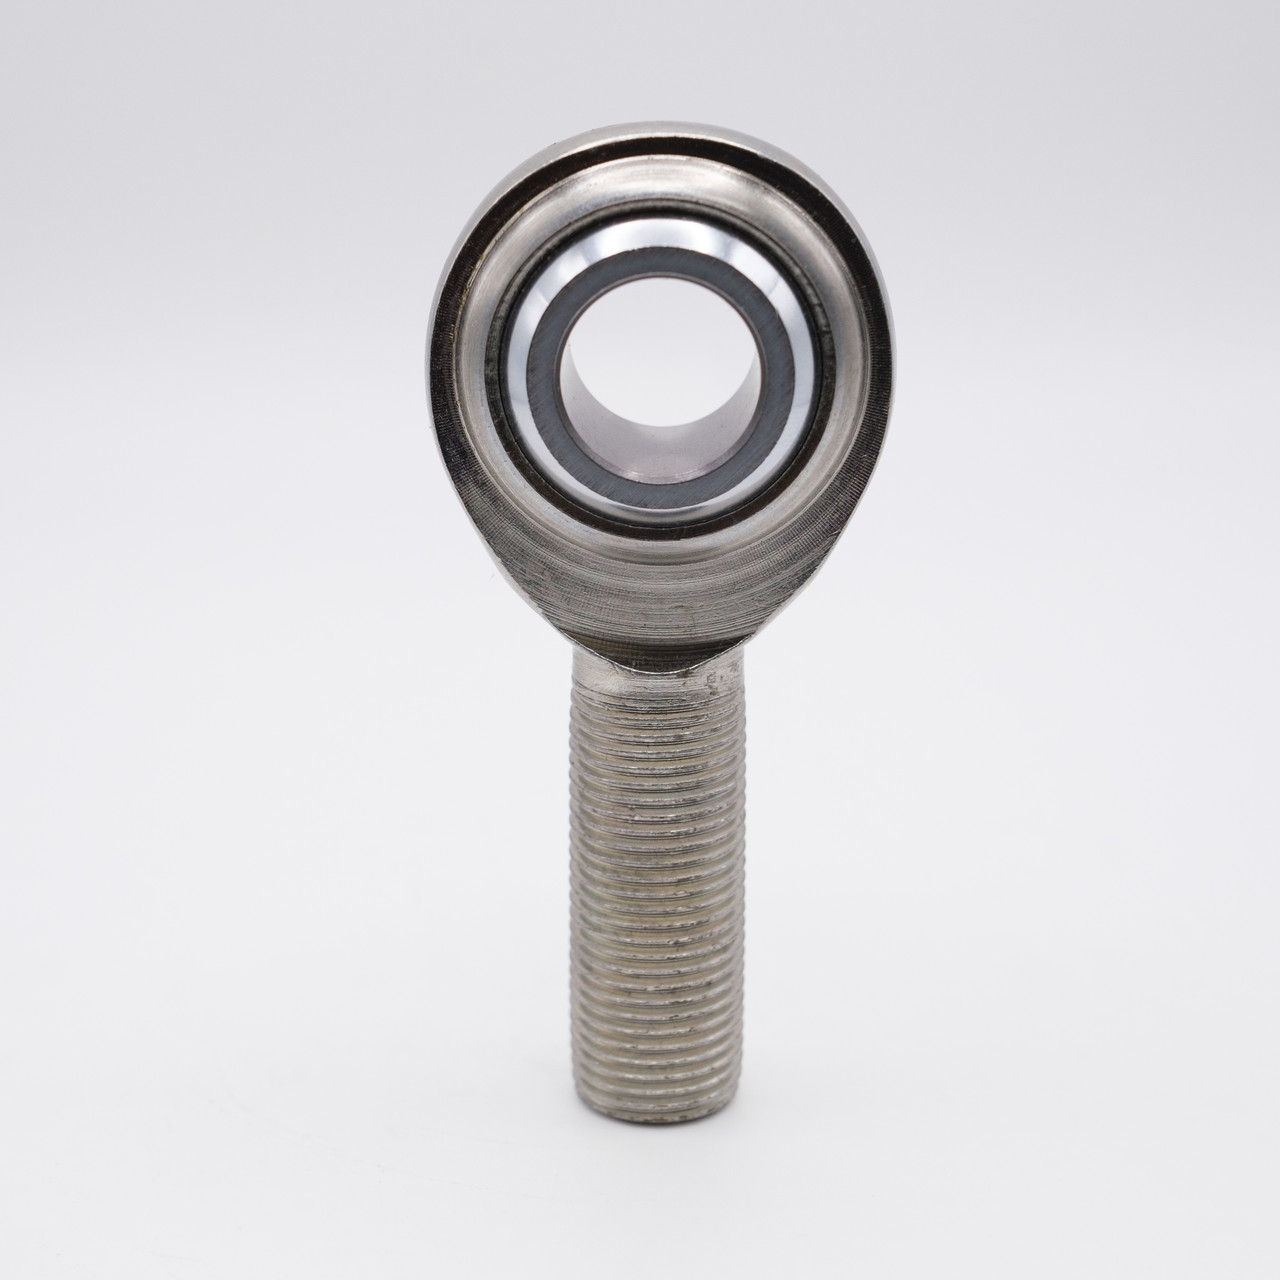 MM-M10 Male Rod-End Bearing 10mm Bore Front View